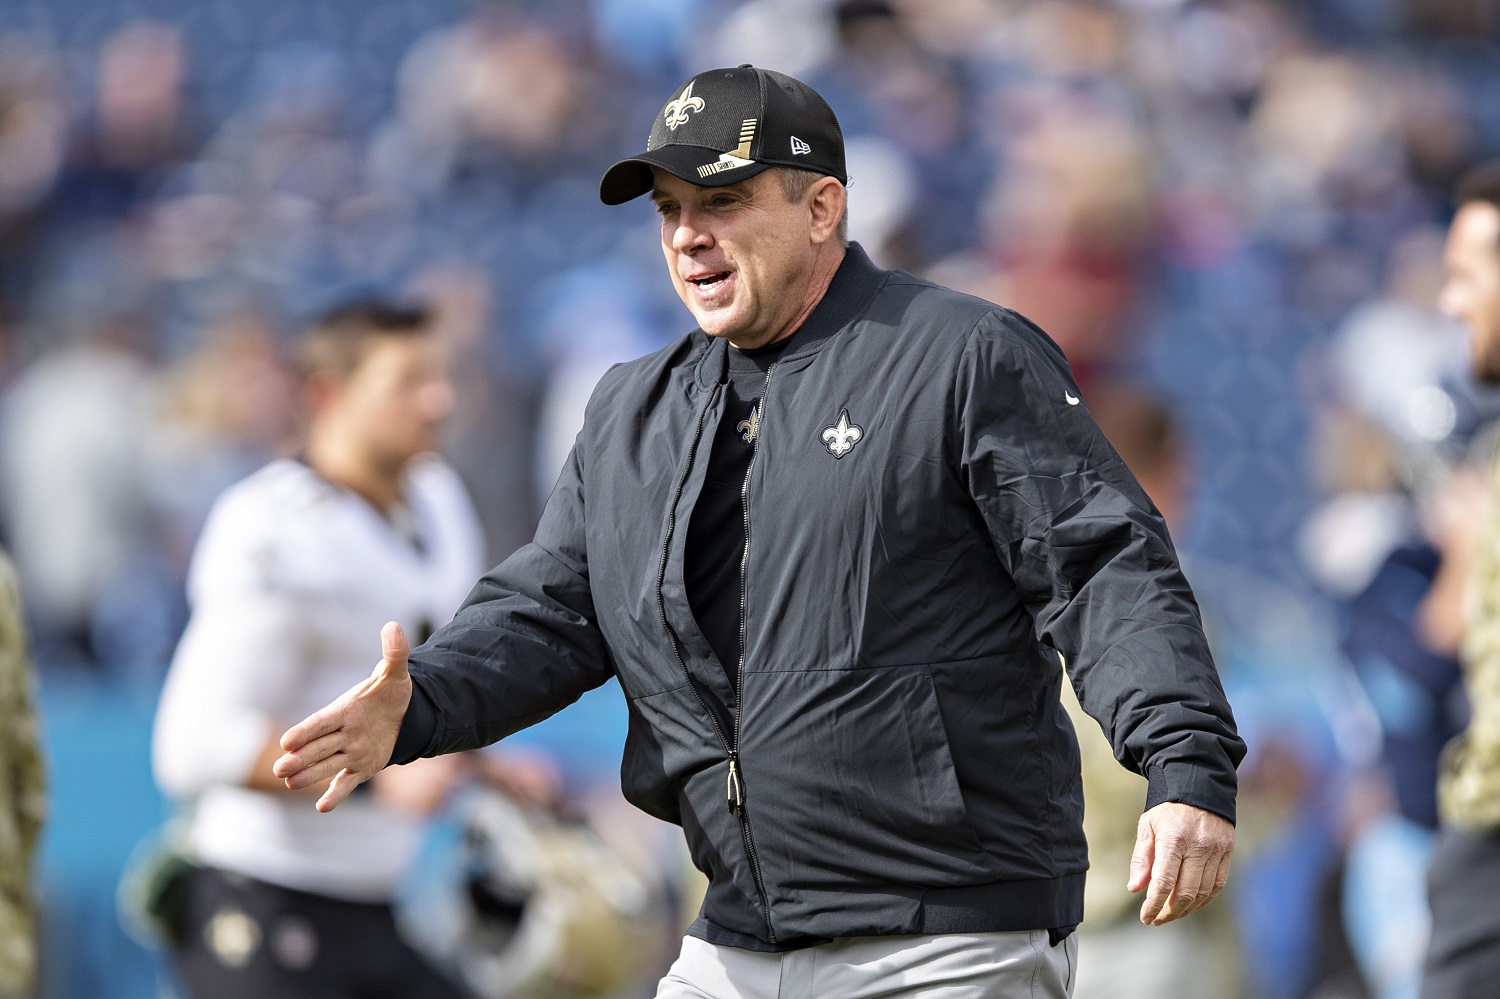 Coach Sean Payton of the New Orleans Saints shakes hands with players before a game against the Tennessee Titans on Nov. 14, 2021, in Nashville, Tennessee.